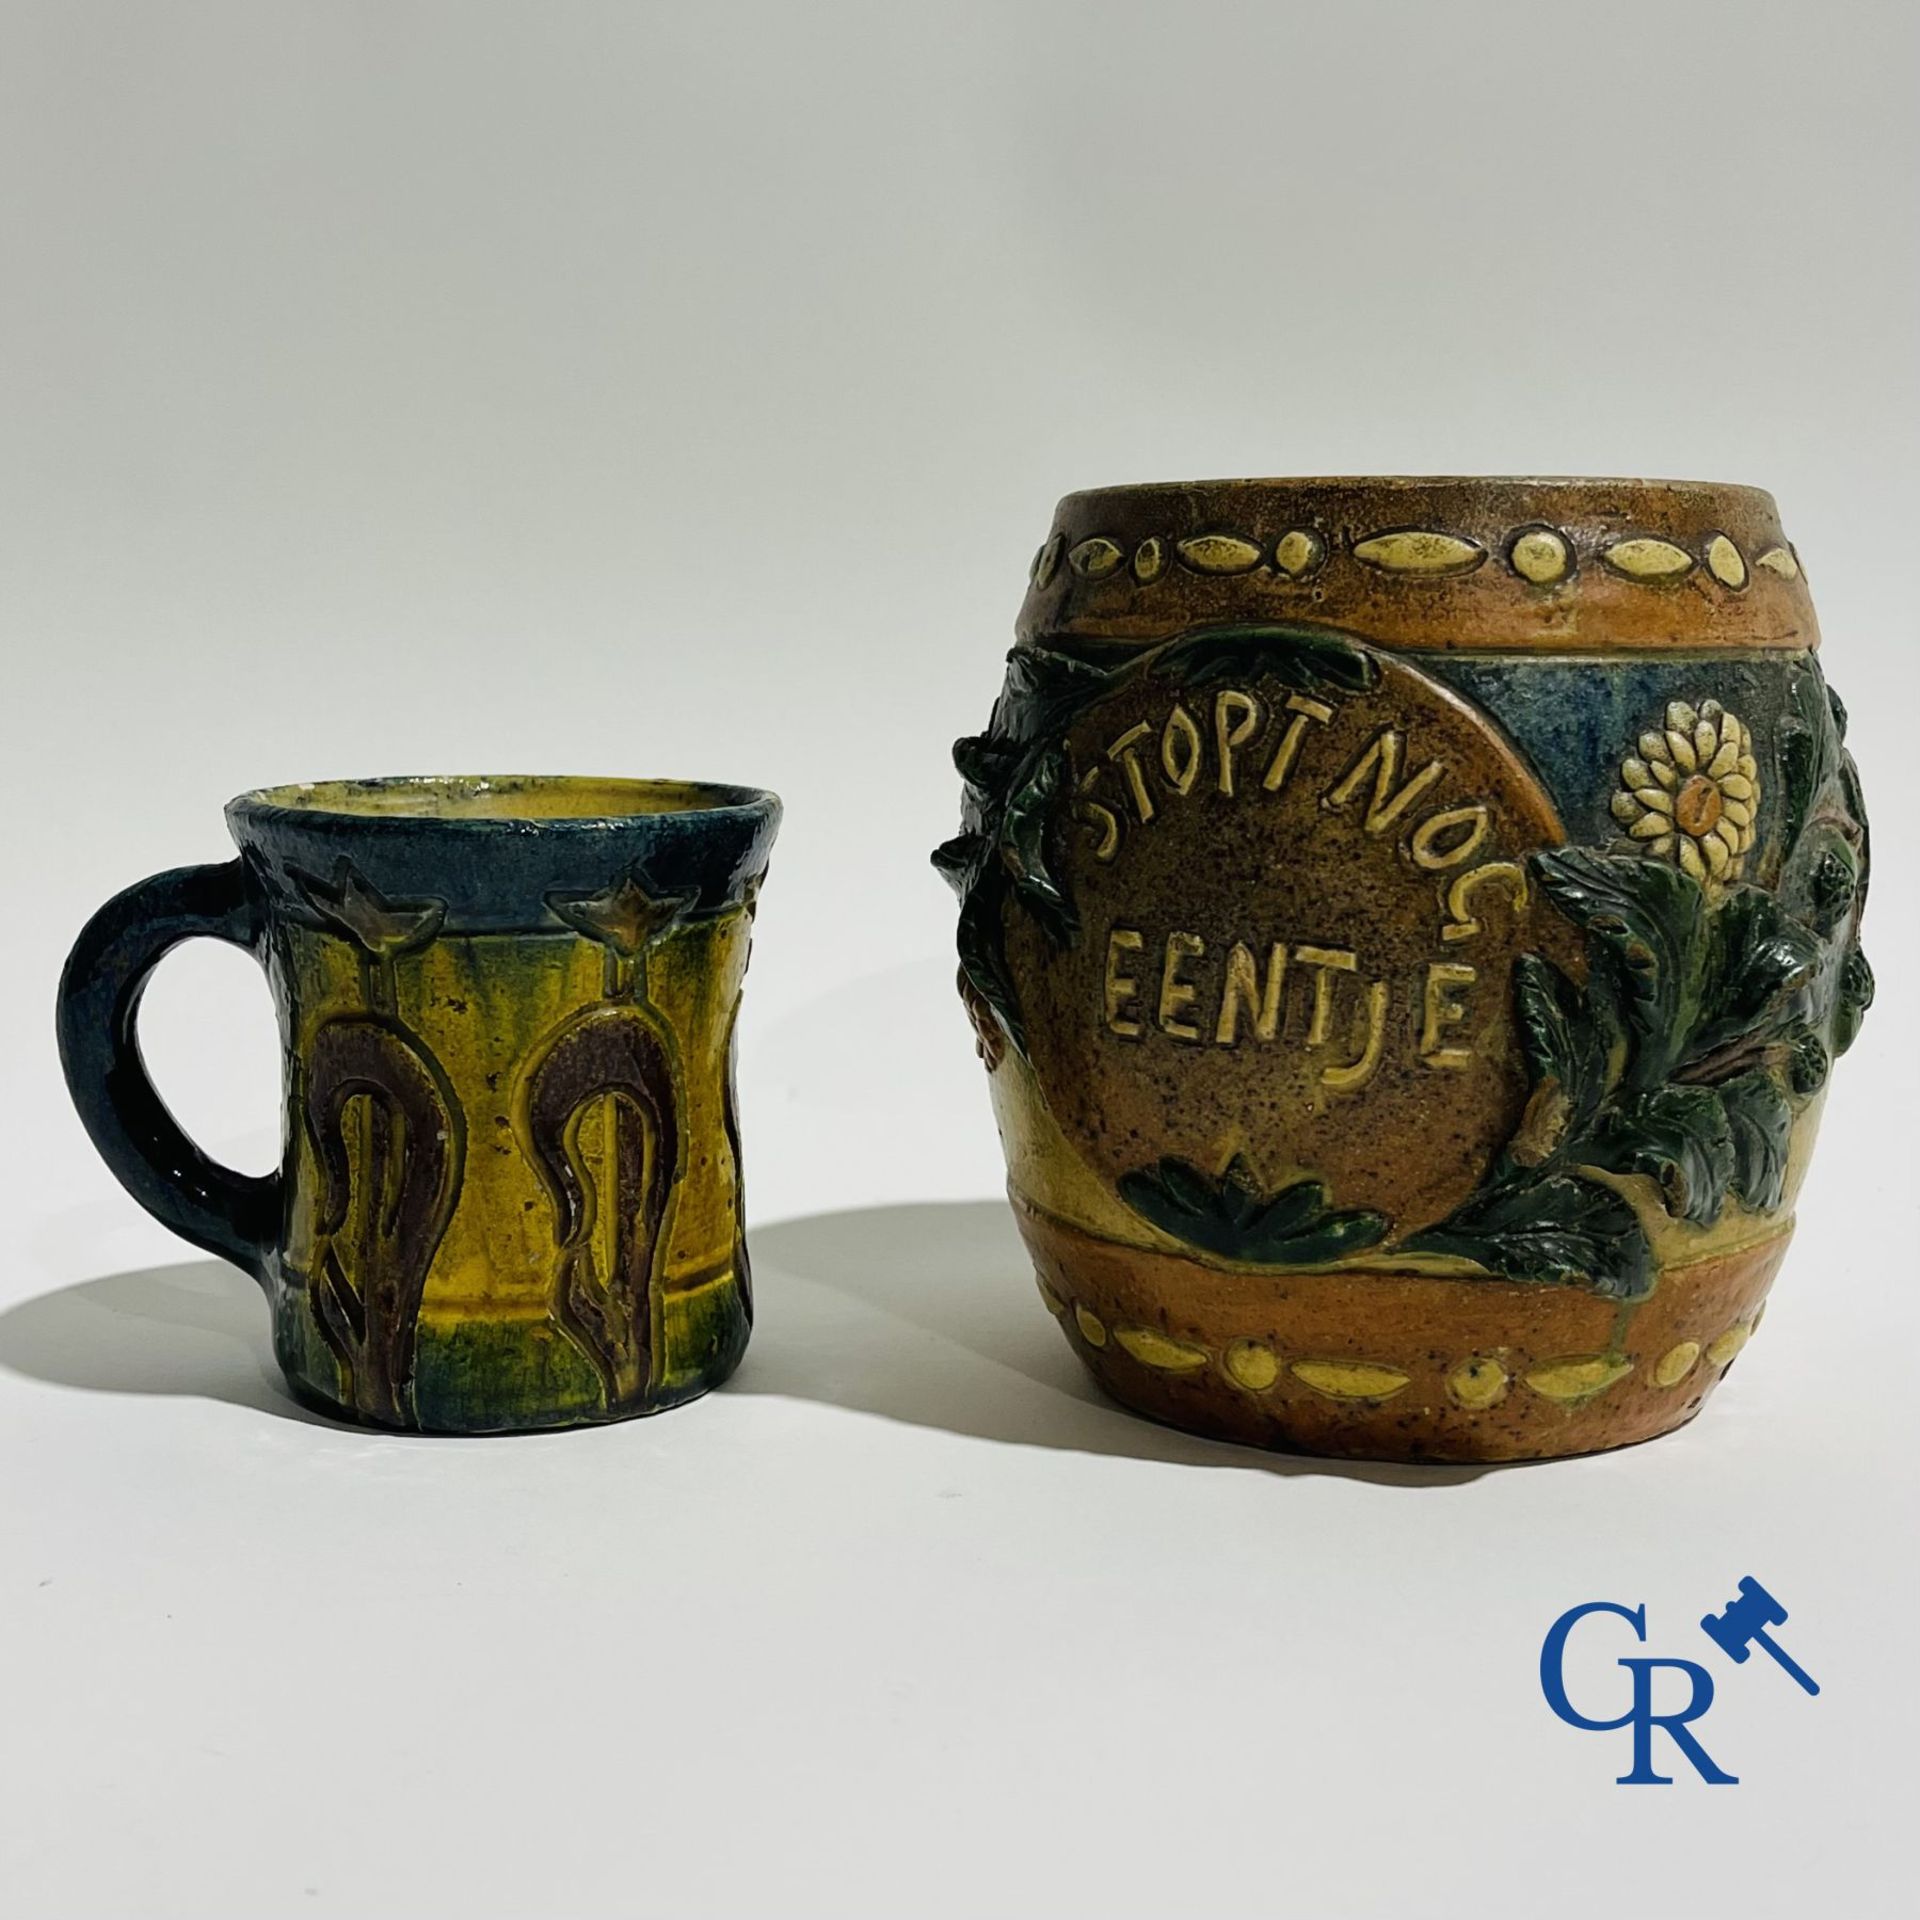 A Torhout tobacco pot Armand Maes-Platteau and a mug in Flemish pottery.